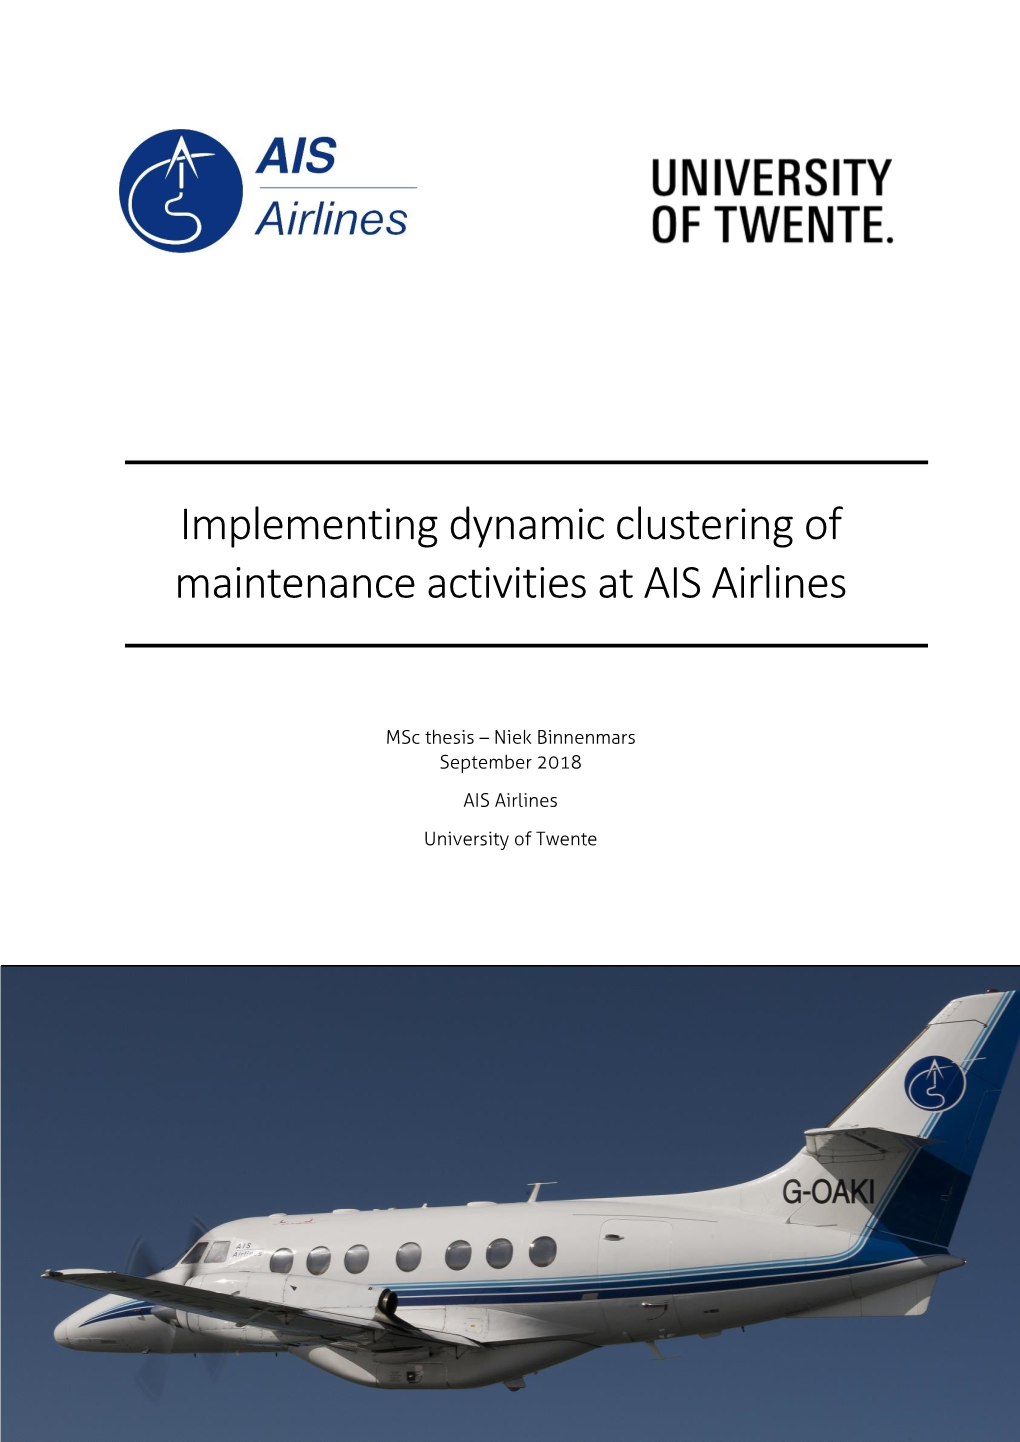 Implementing Dynamic Clustering of Maintenance Activities at AIS Airlines